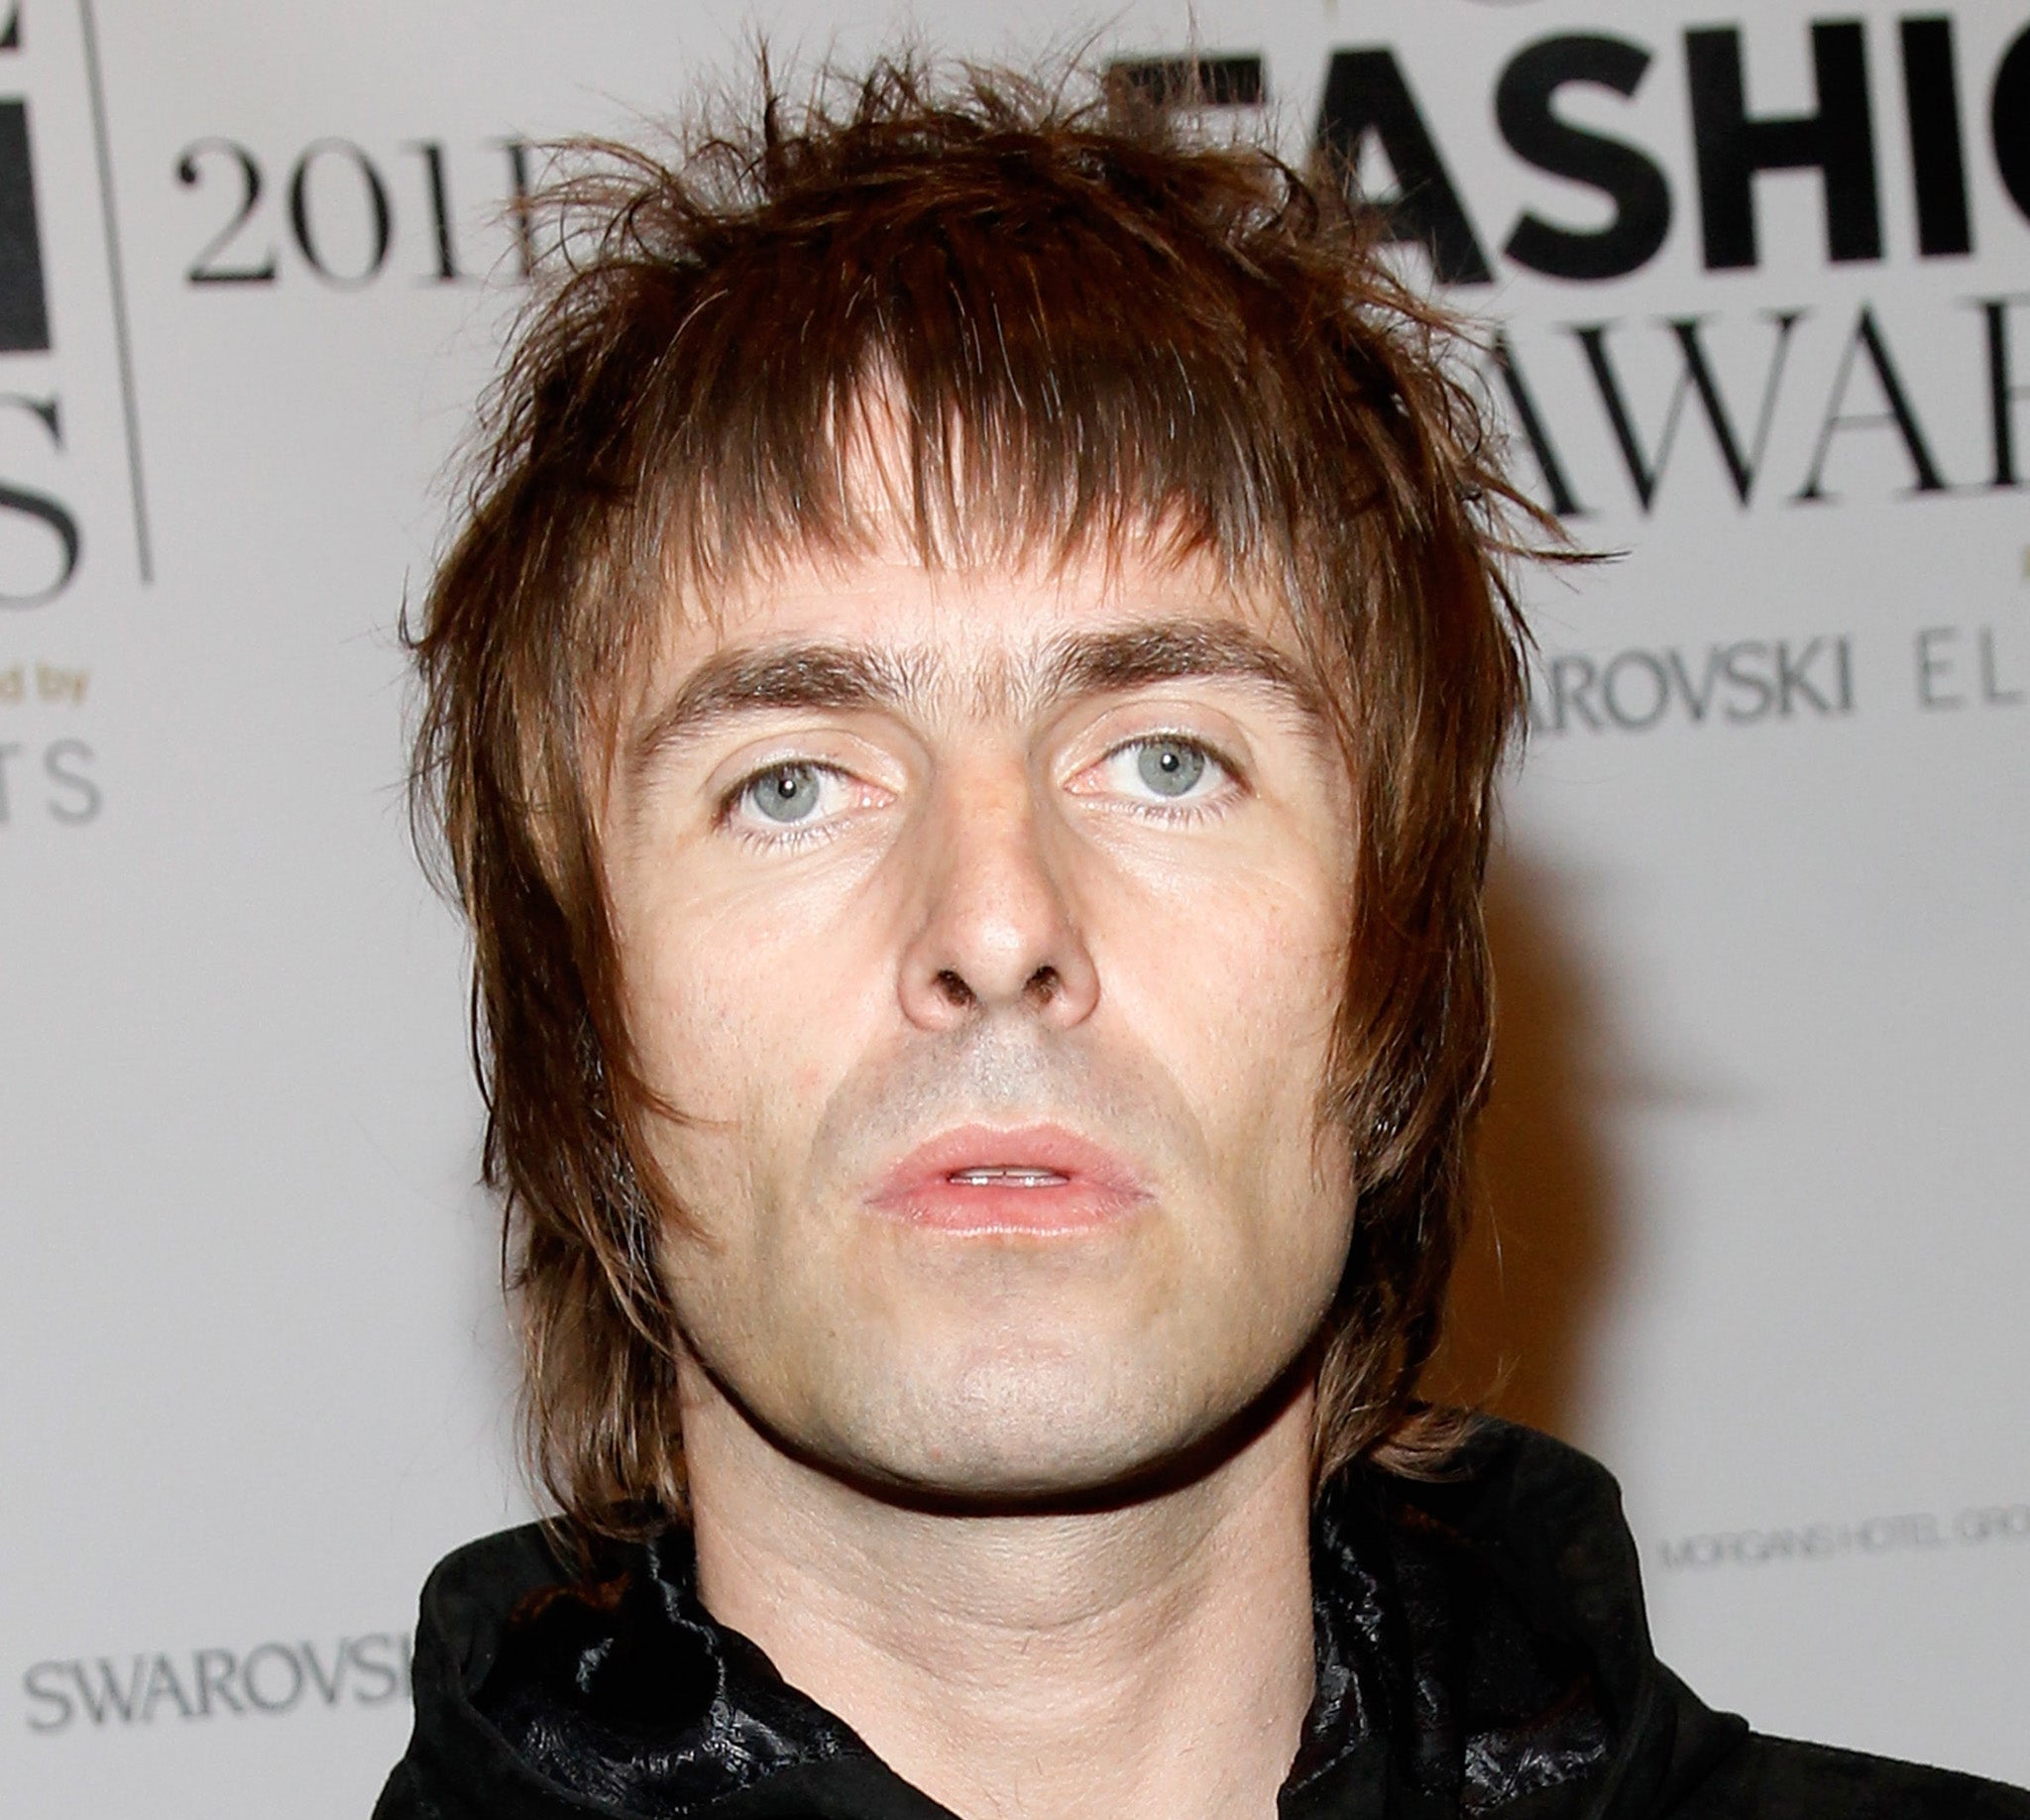 Liam Gallagher is due to perform on The Voice